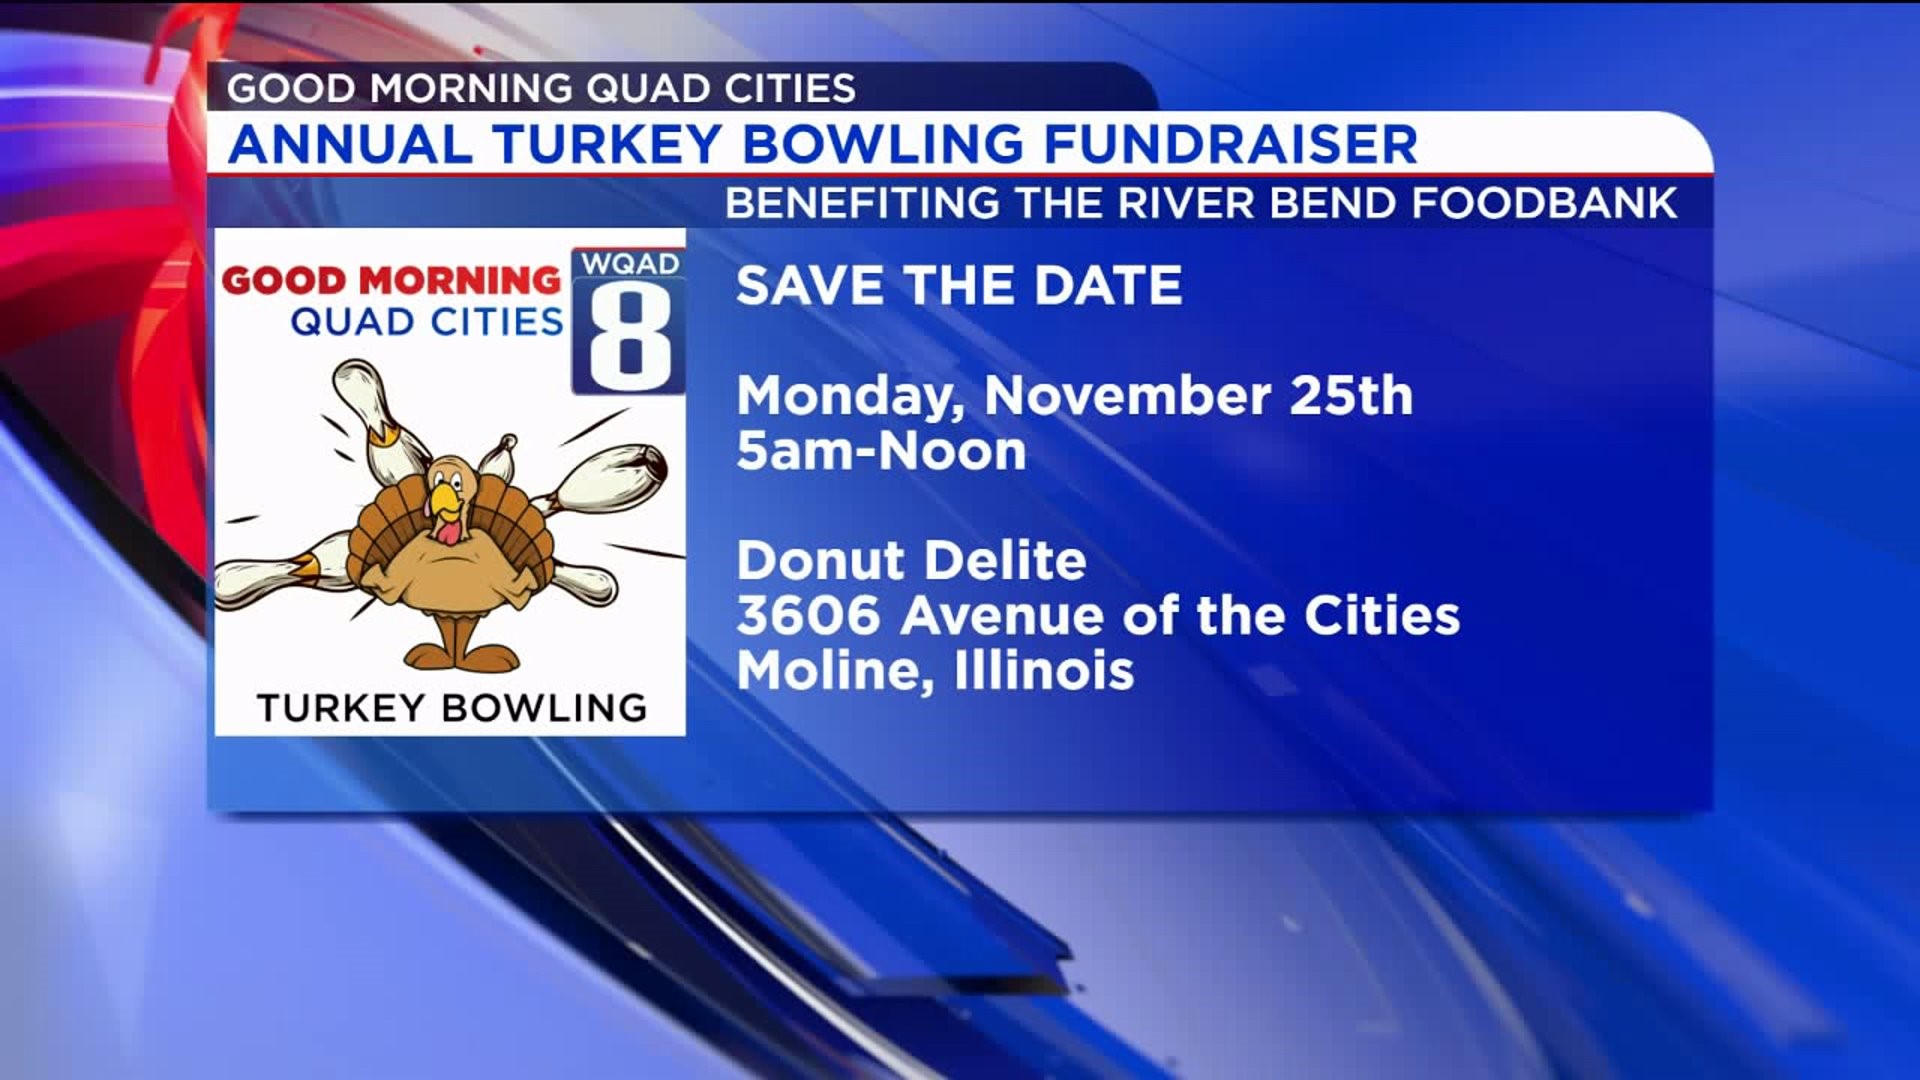 Turkey bowling to support River Bend foodbank